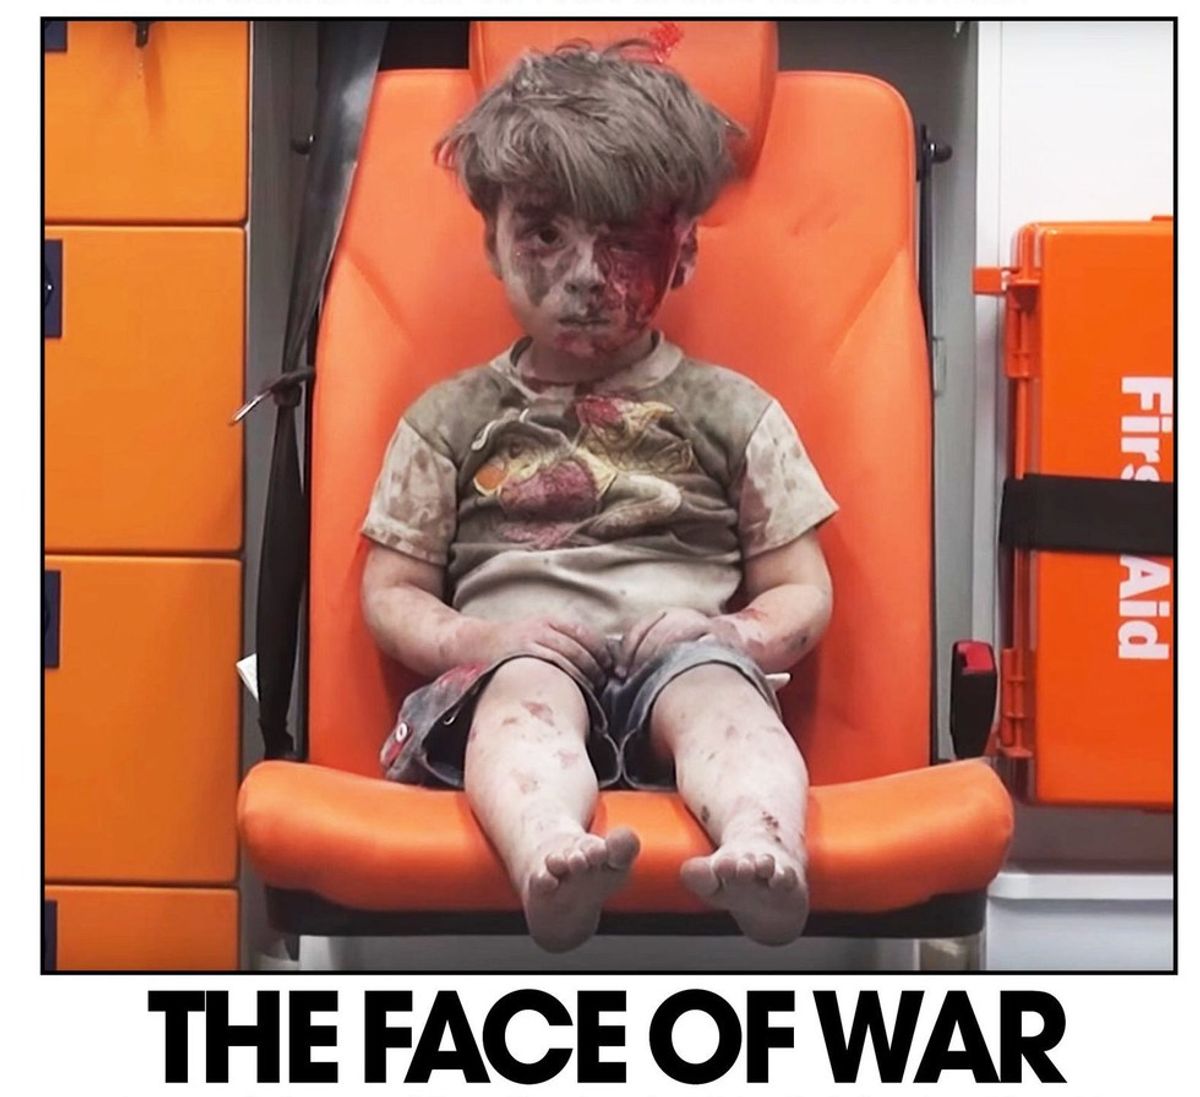 The Little Boy In The Ambulance: Why You Need To Understand What's Happening In Syria